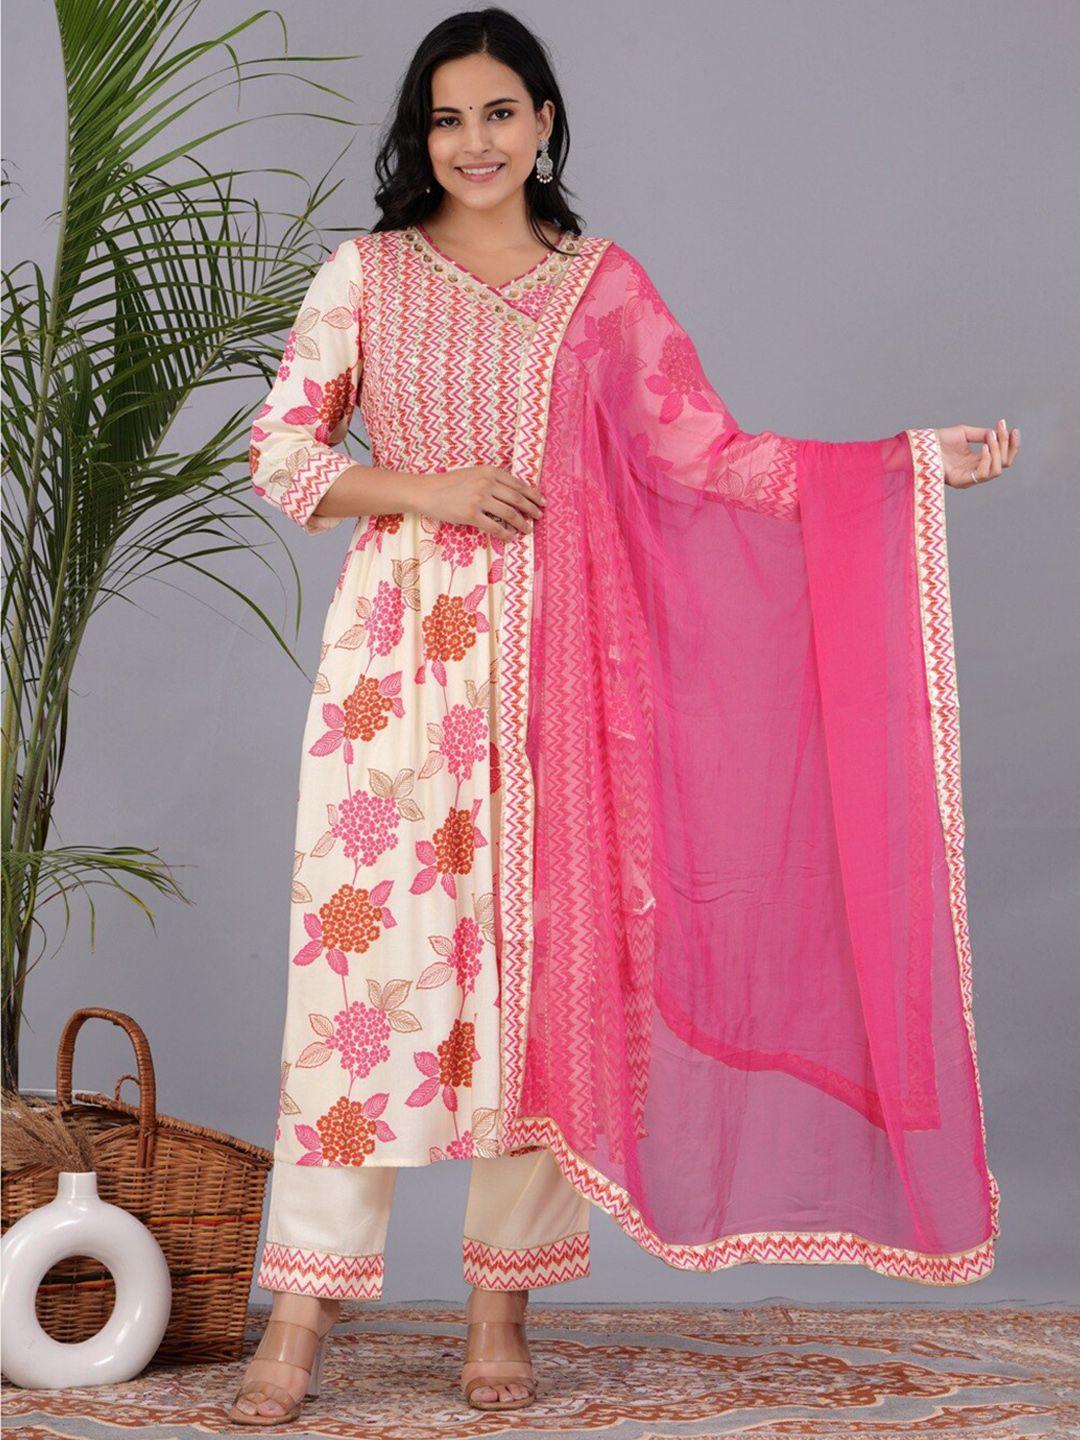 unisets floral embroidered angrakha kurta with trousers & dupatta